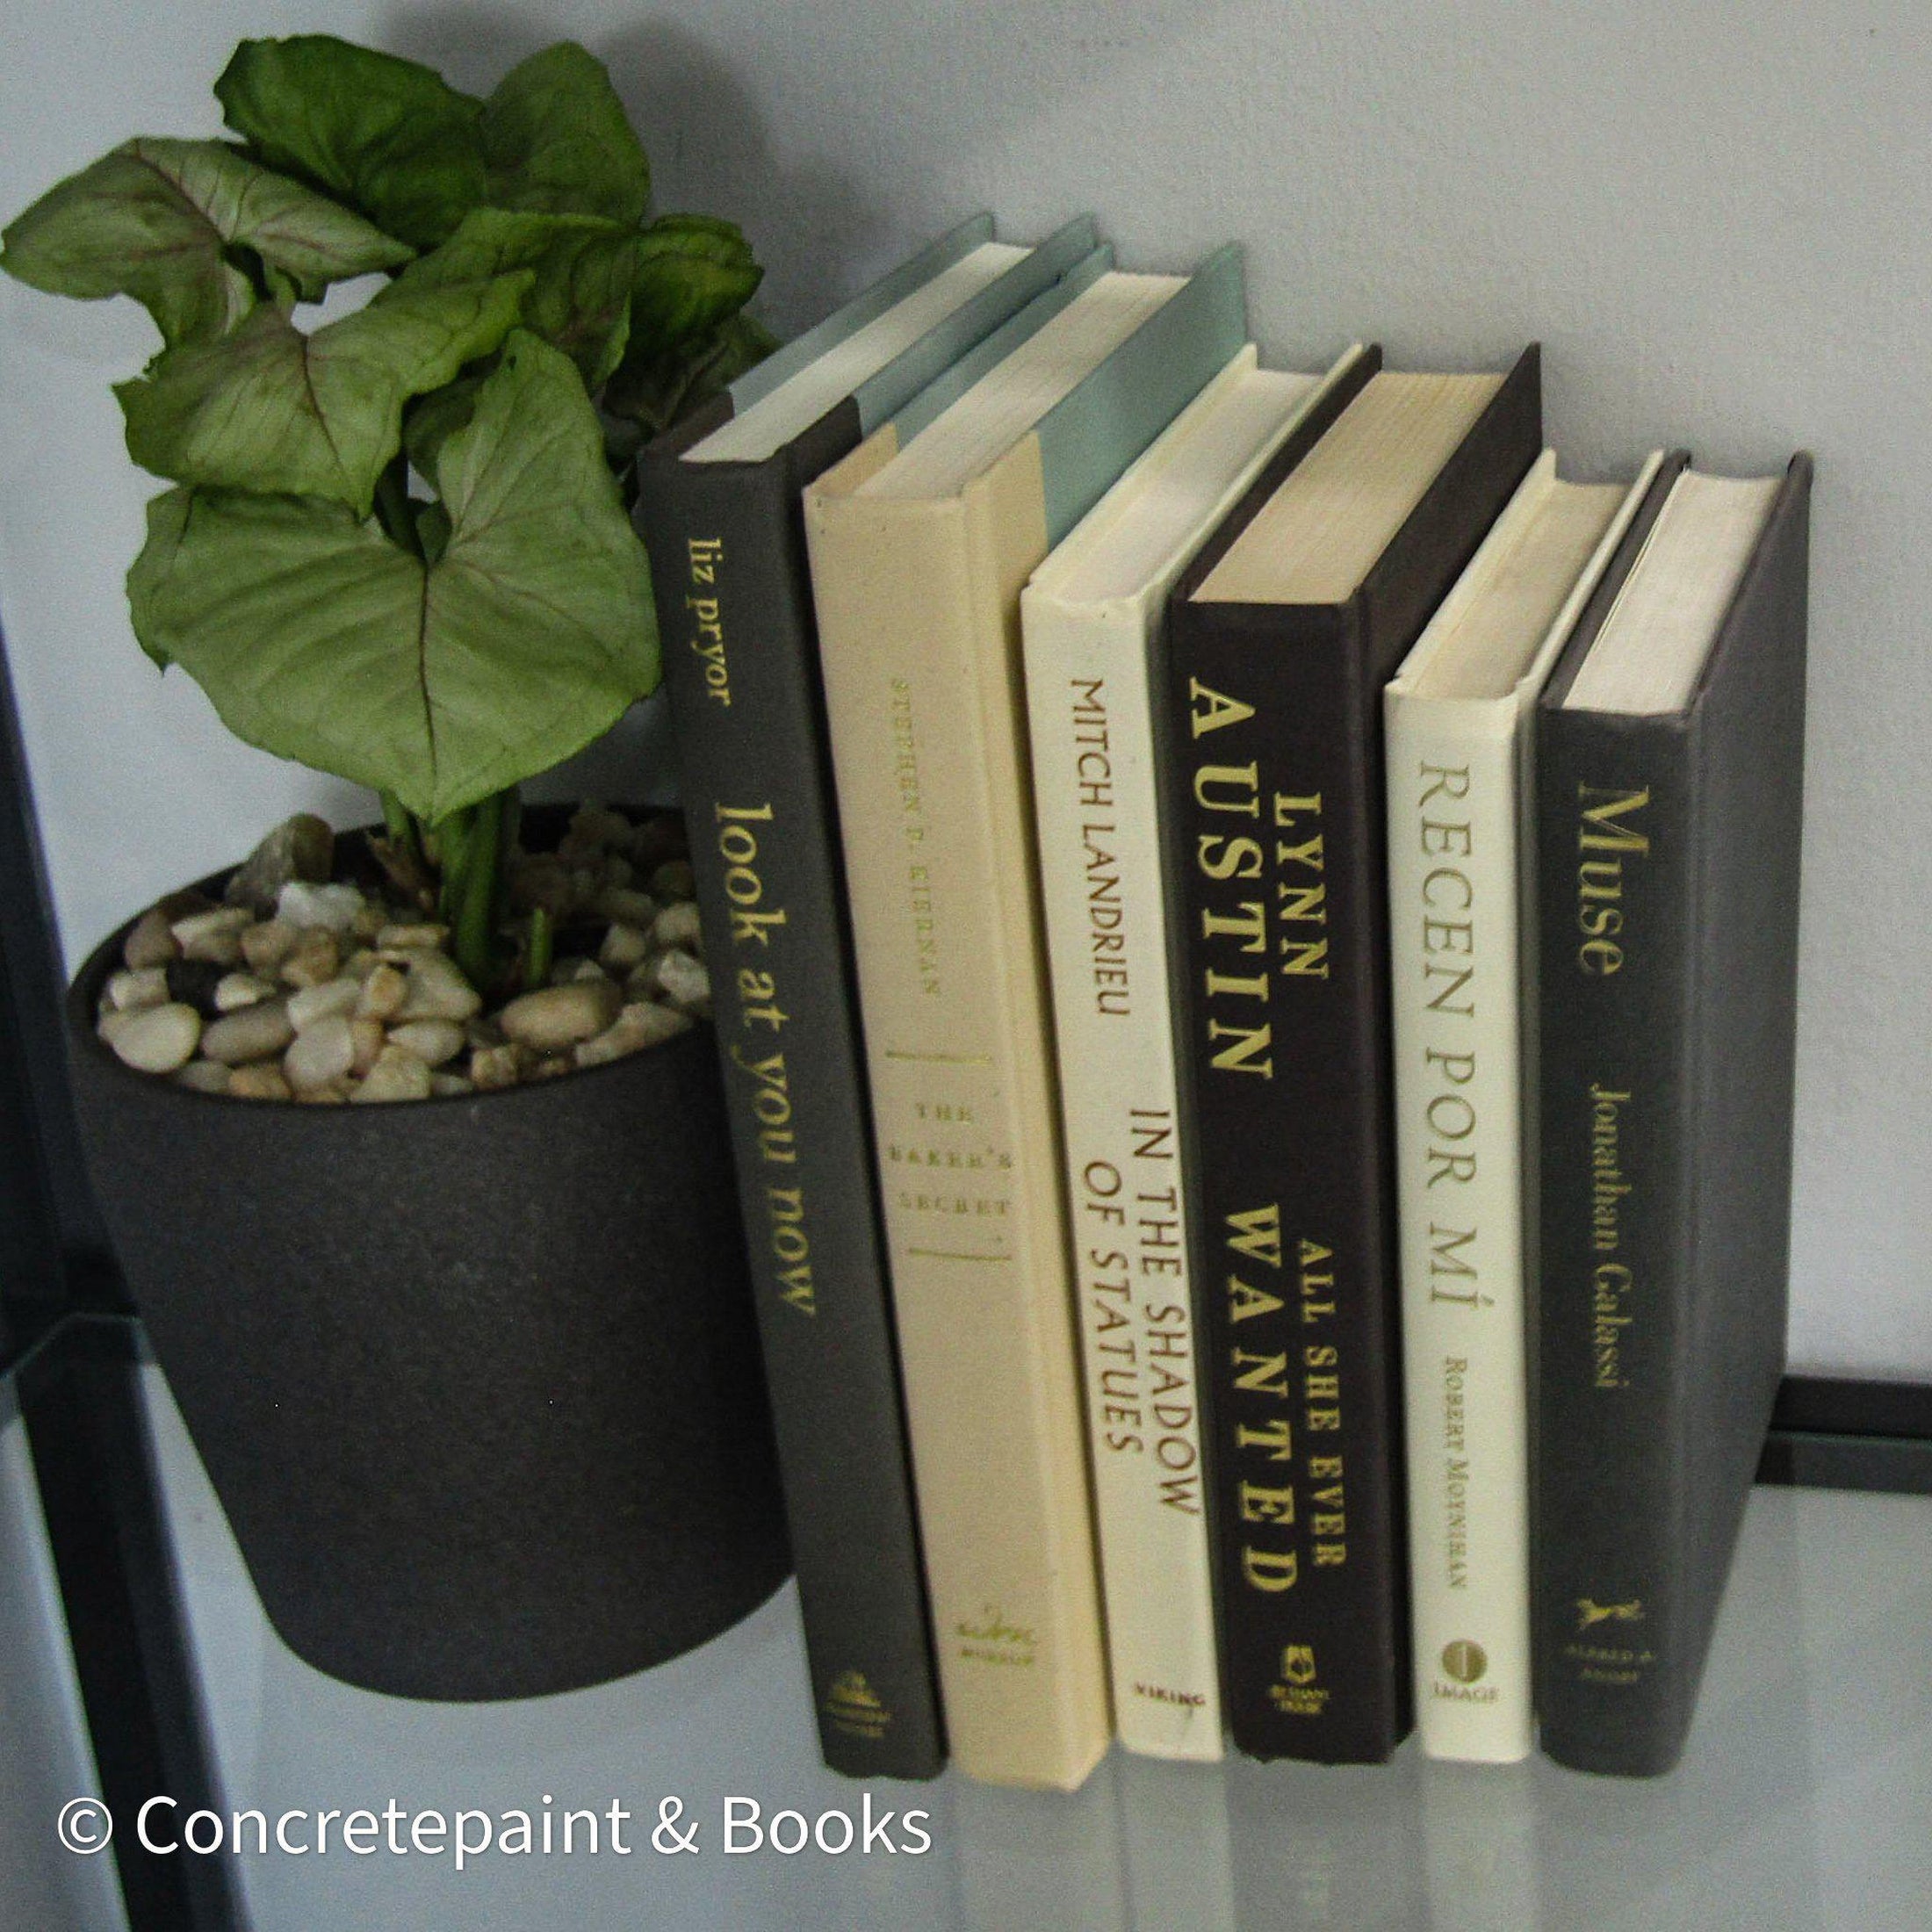 Set of hardcover books in gray and neutral colors staged and used as decorating home display. 